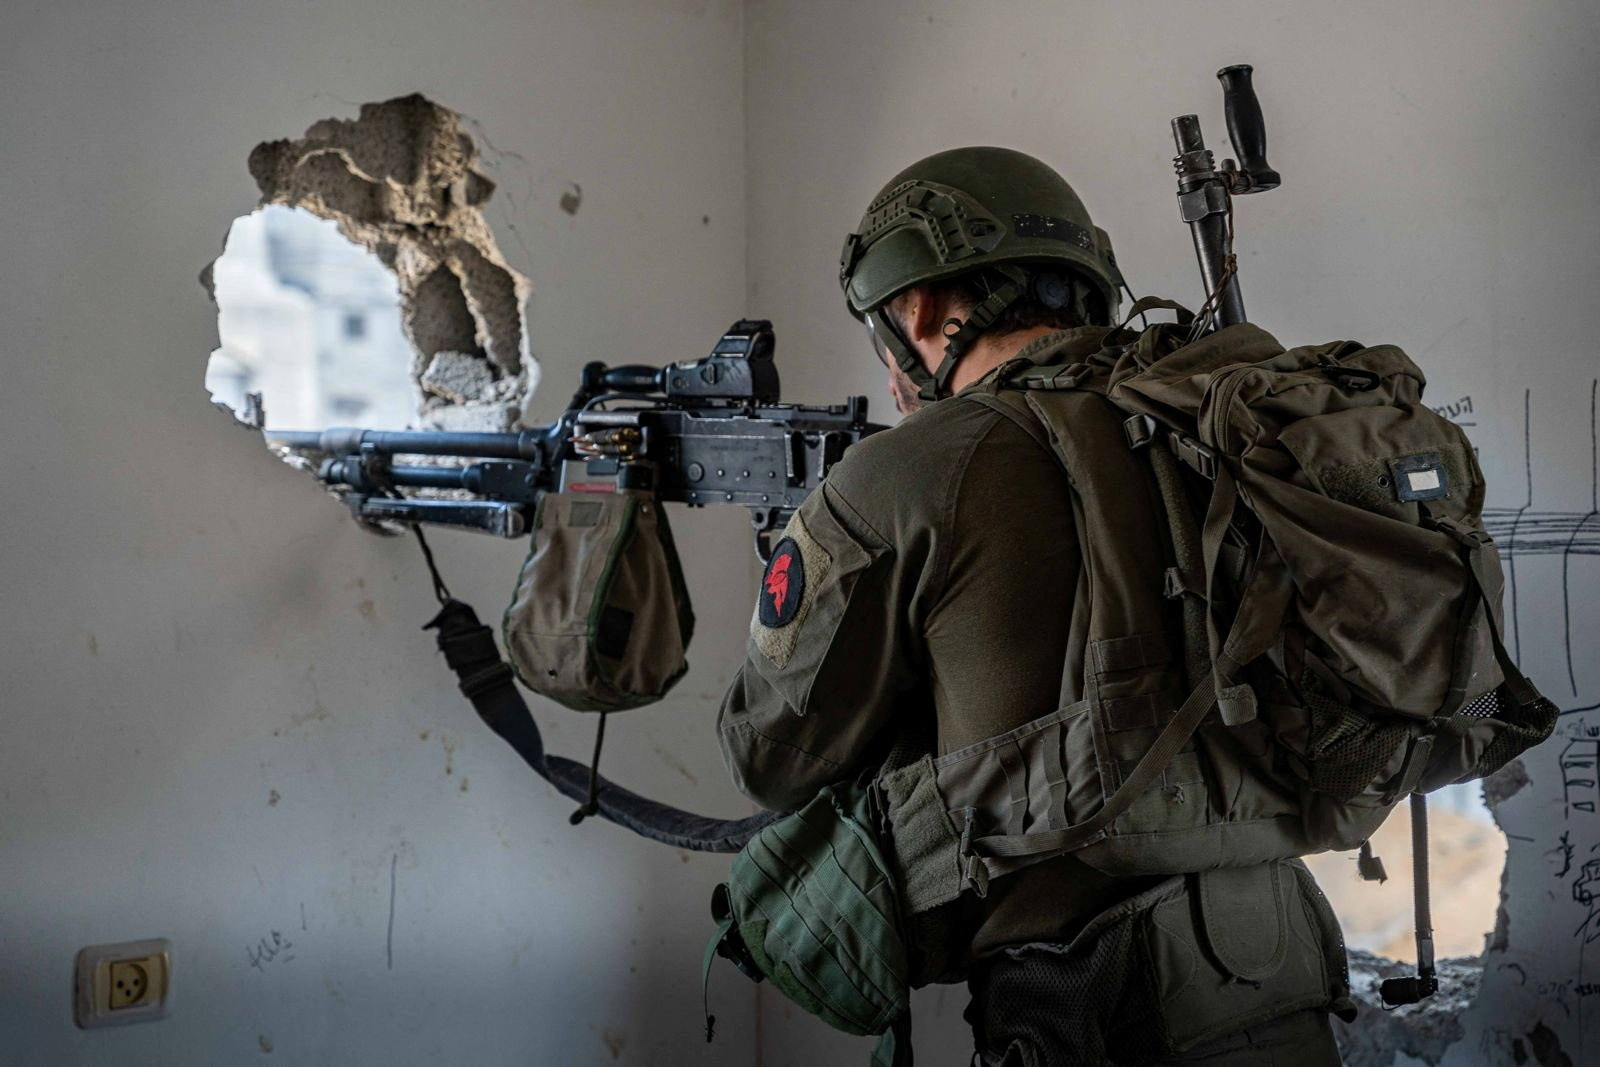 Israeli soldiers operate in the Gaza Strip